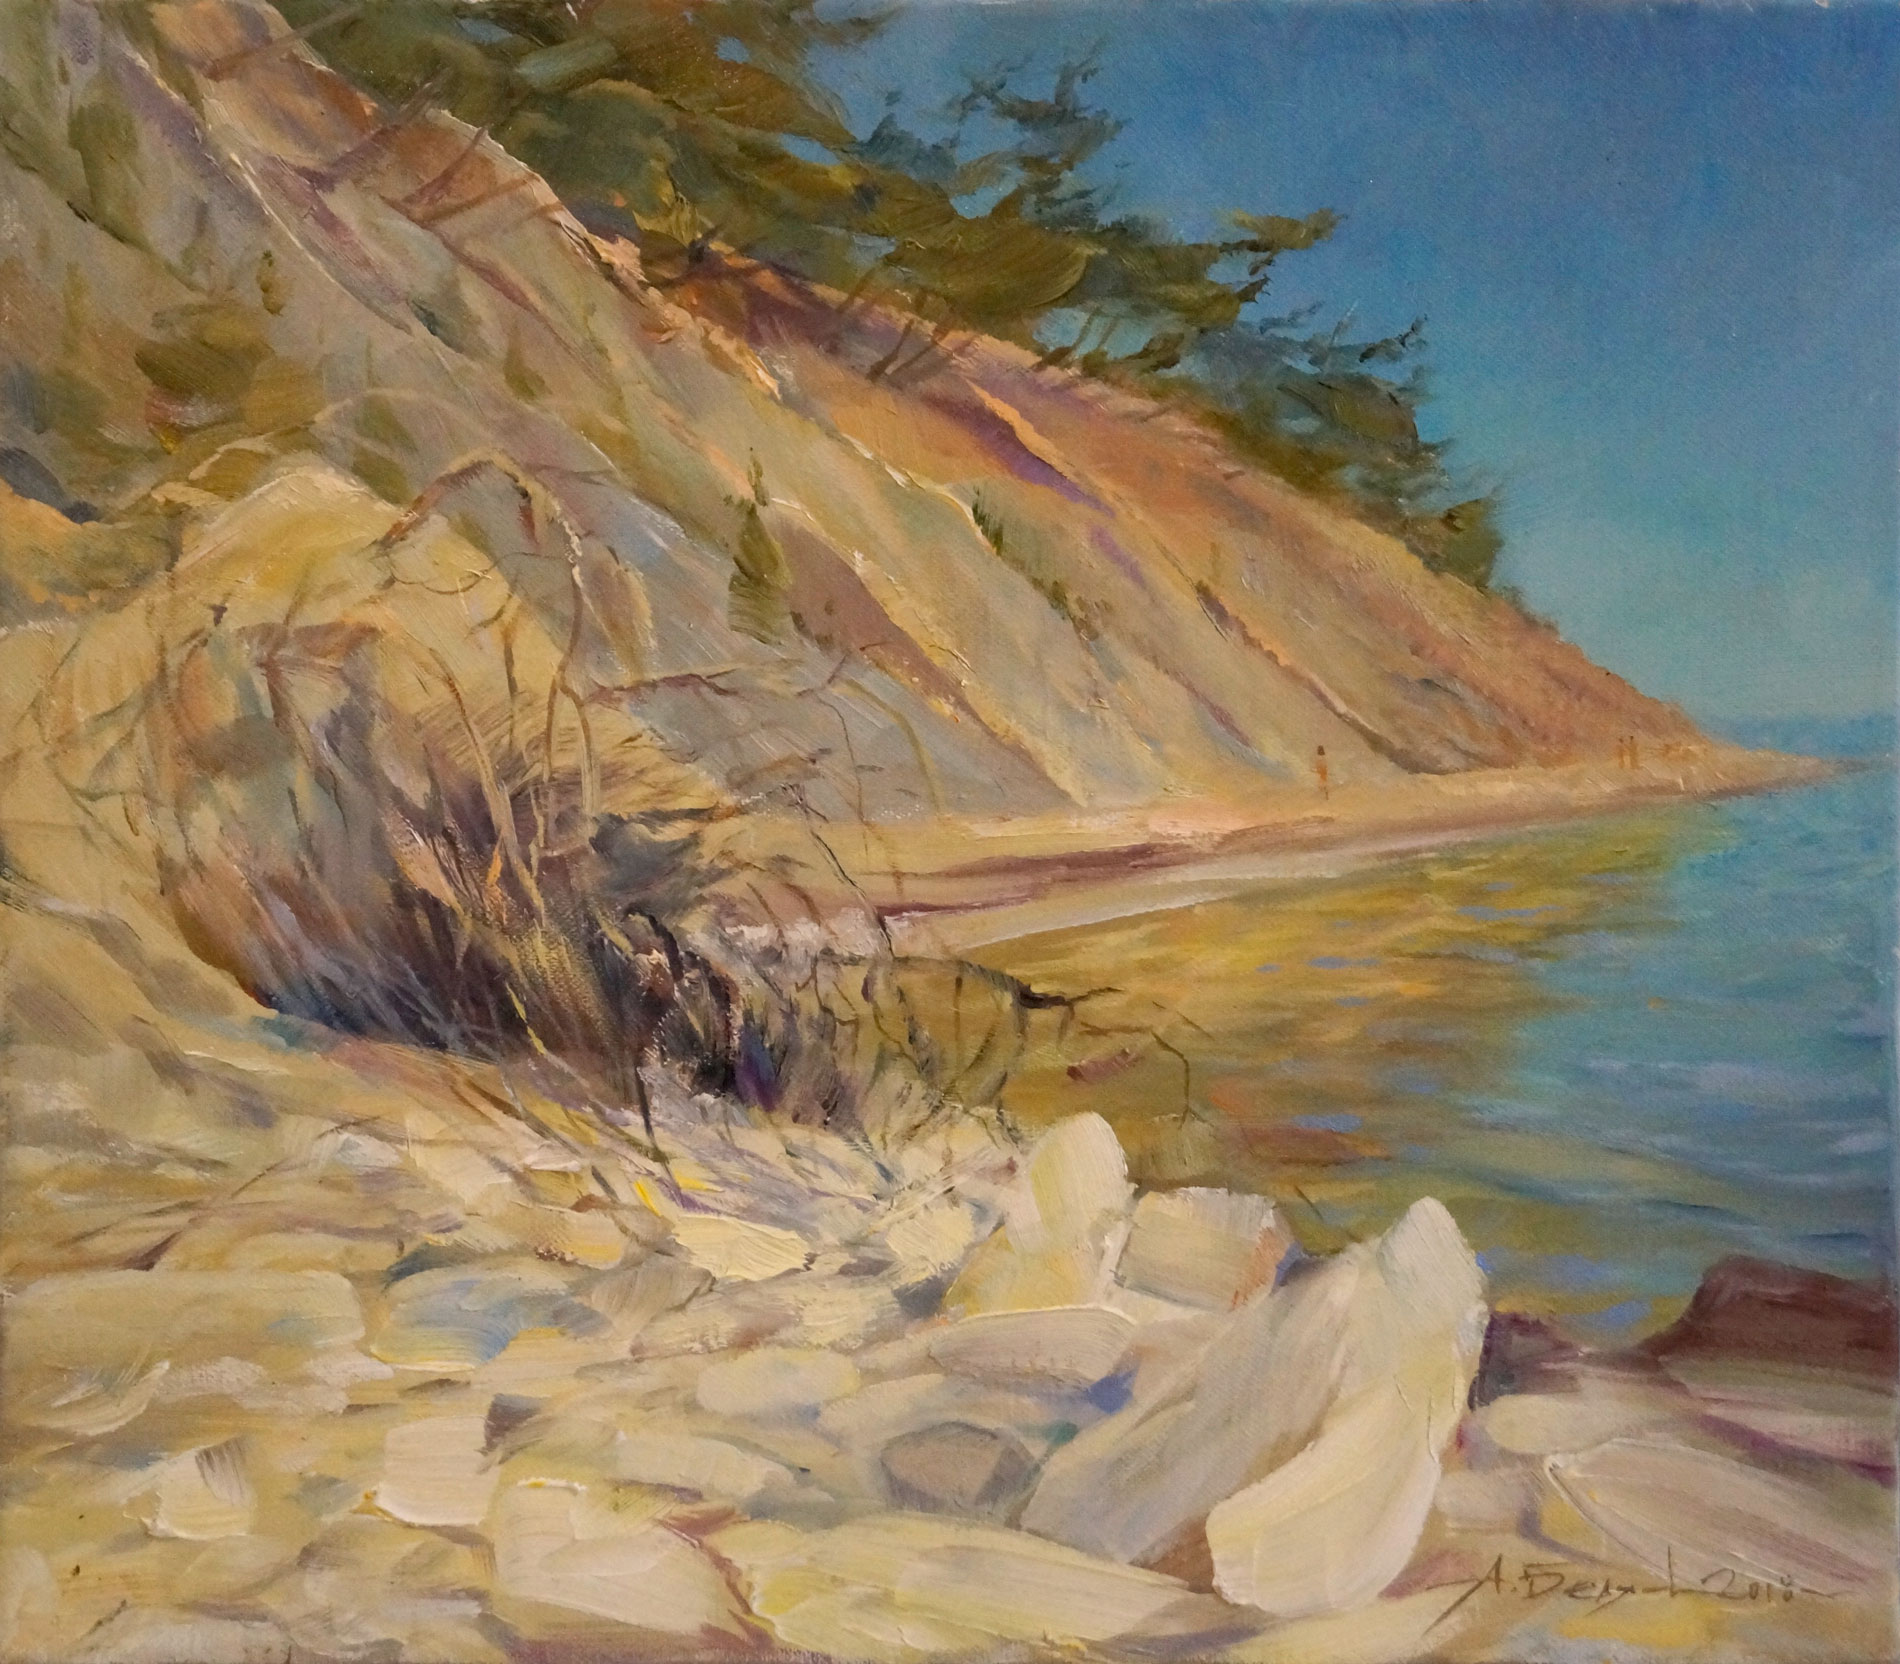 Bay By the "Blue Abyss", Alexander Belyaev, Buy the painting Oil